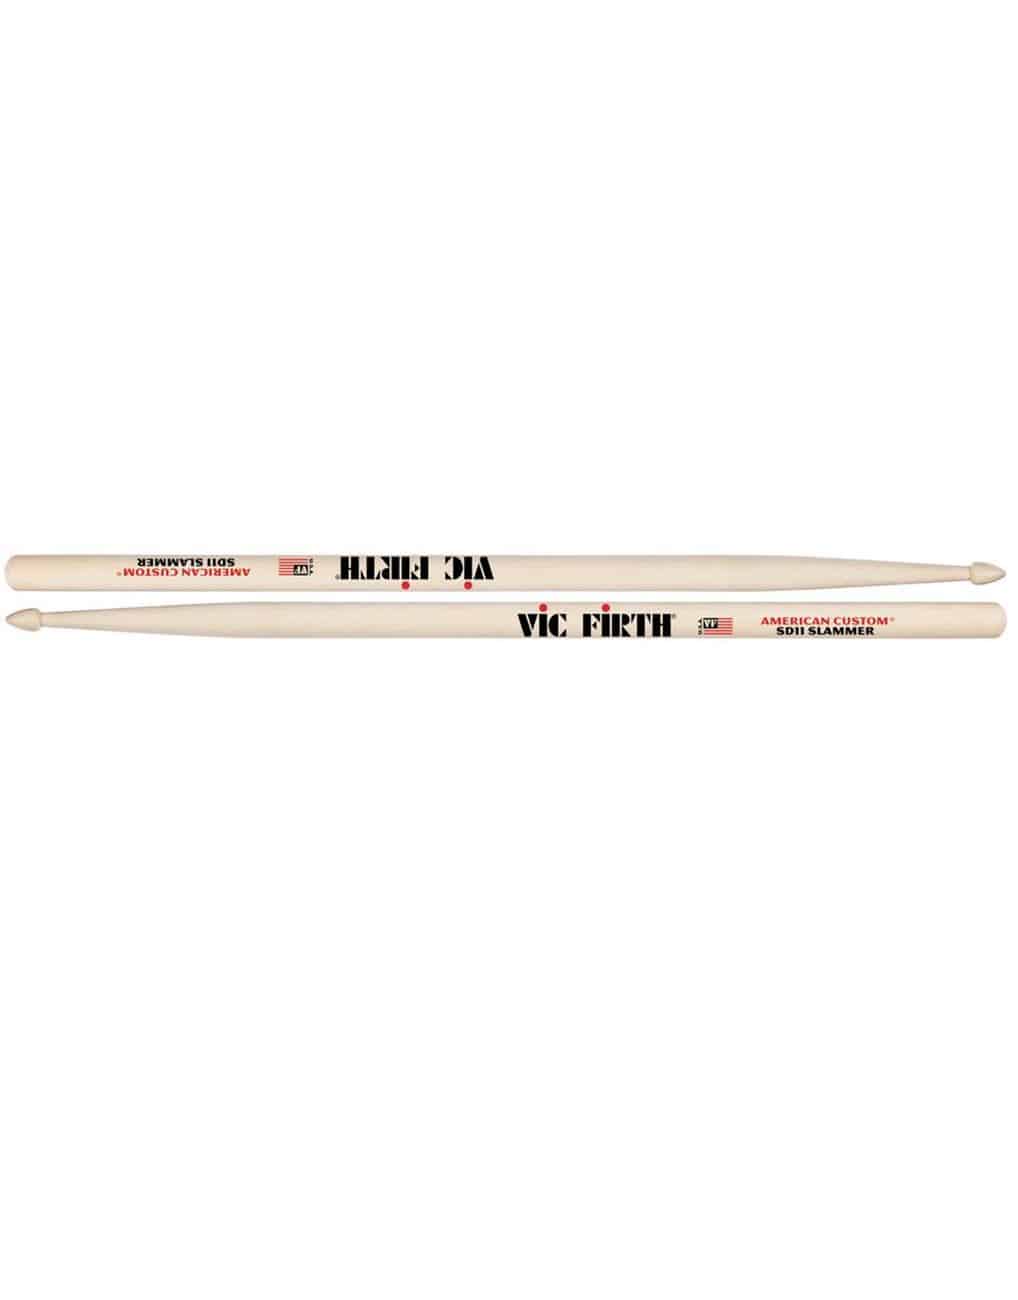 vic firth sd 11 wood bagketes huge